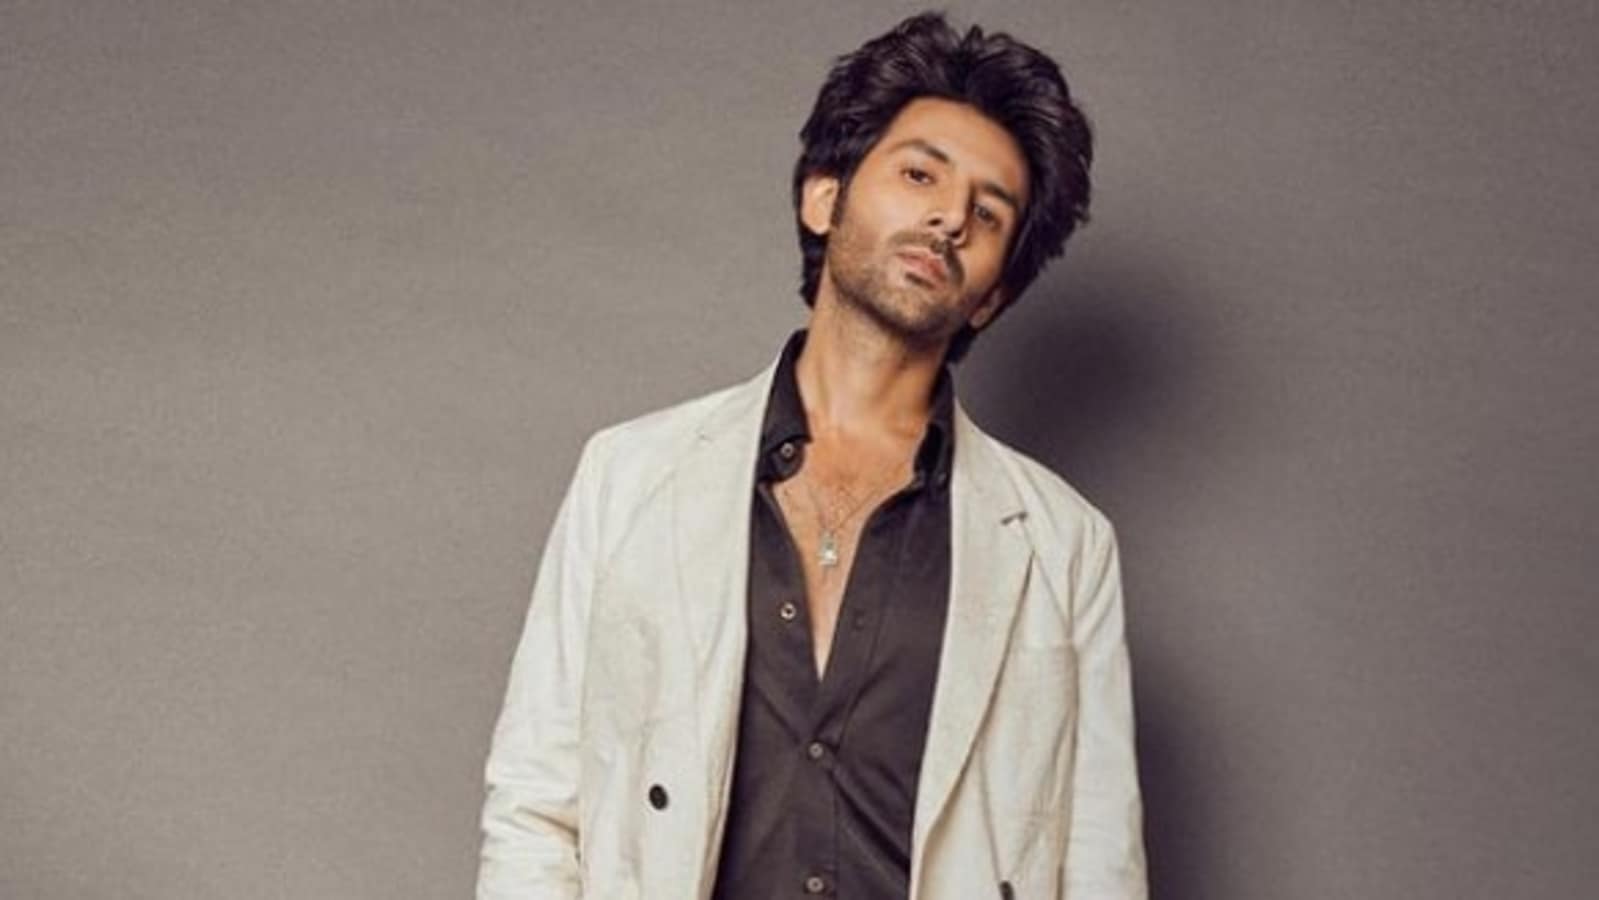 Kartik Aaryan says he is proud of being ‘popular among rapid-fire shows’, fans feel it’s a dig at Koffee With Karan